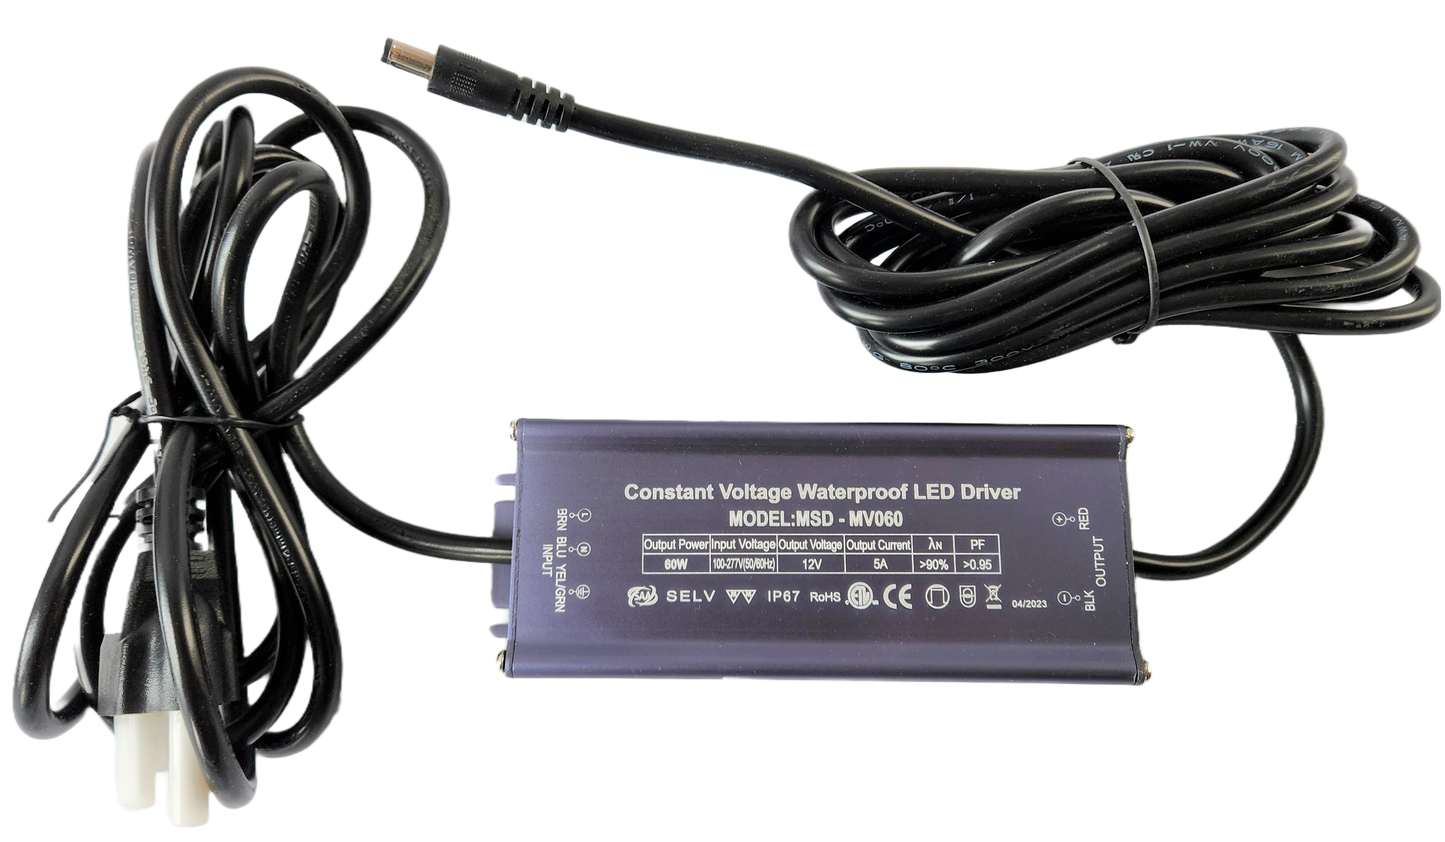 12V 5A PWR Supply For Power INJ